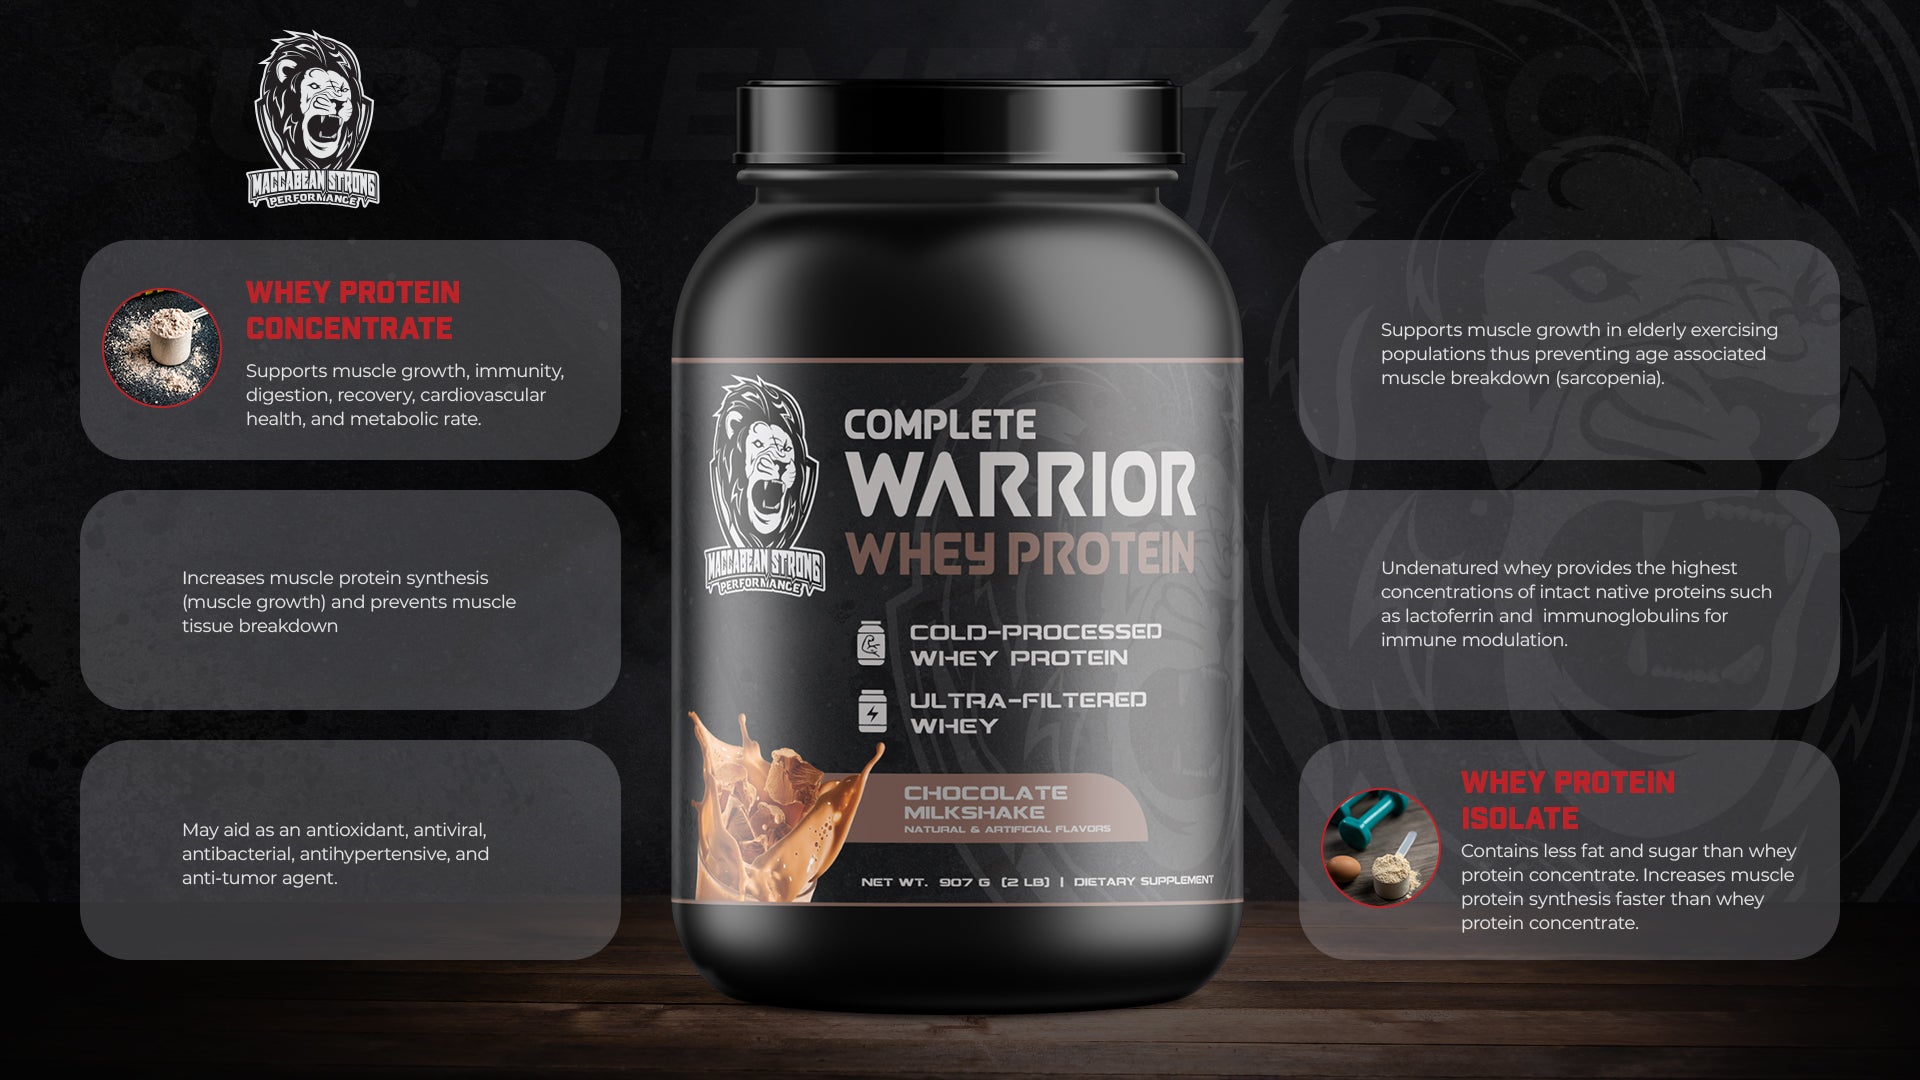 Complete Warrior Whey Protein 2LB Chocolate